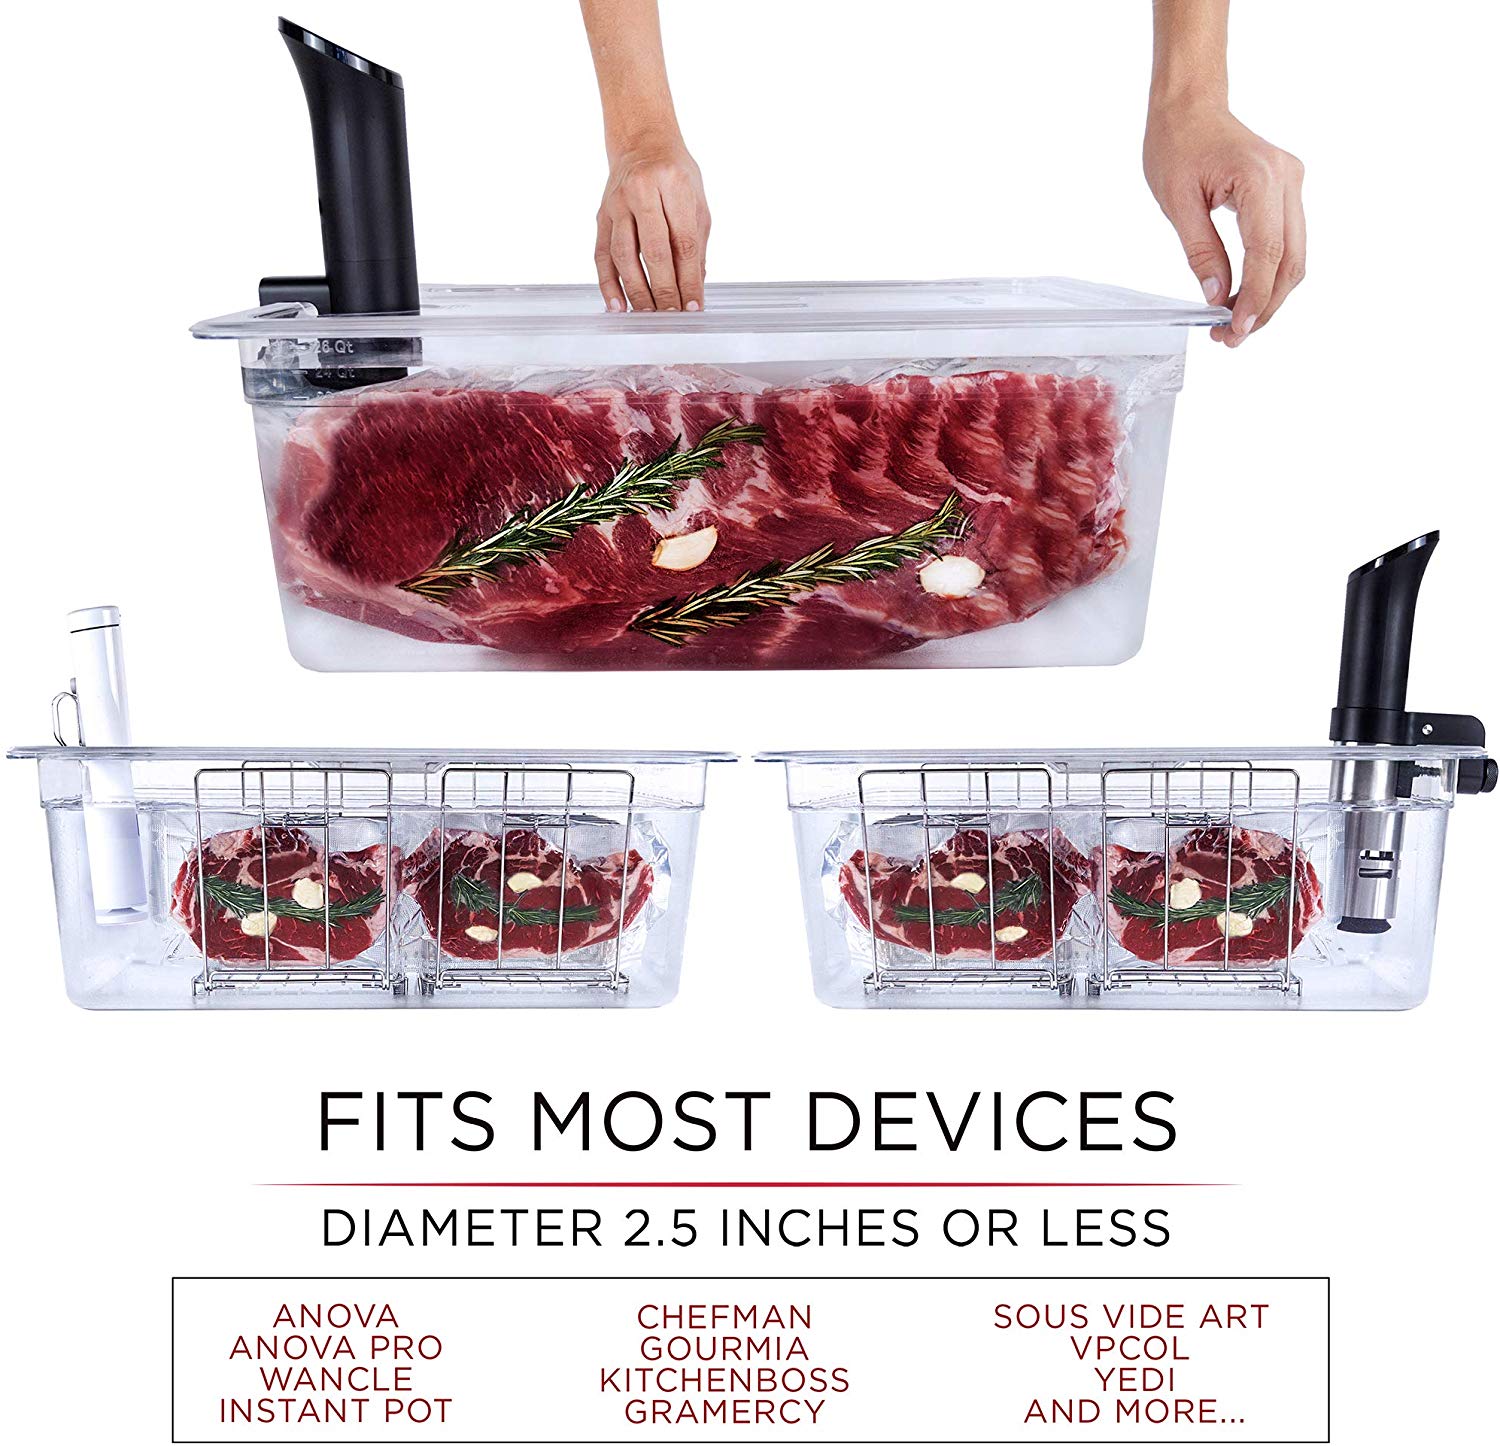 VÄESKE Large Sous Vide Container with Lid and Rack Kit